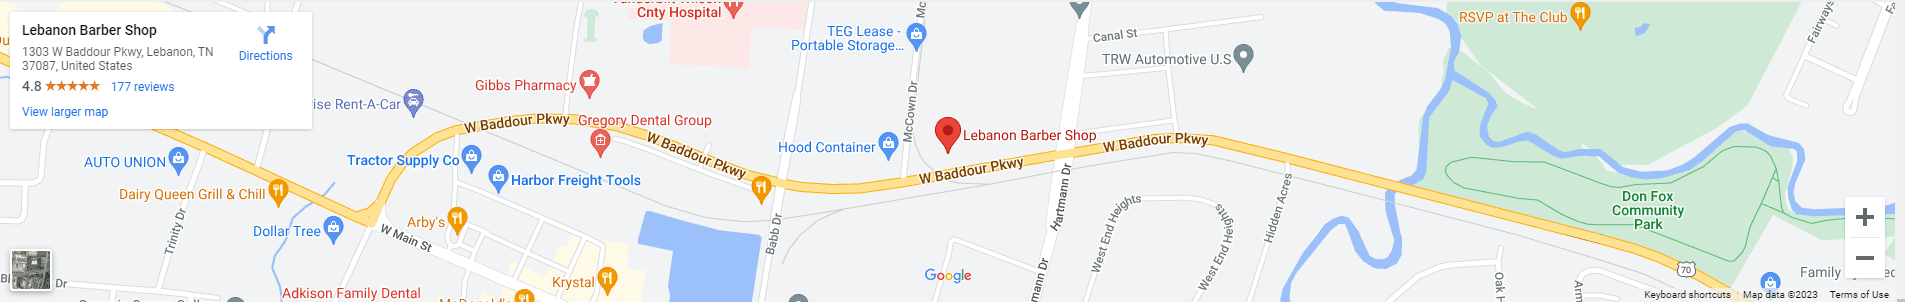 A map of lebanon barber shop location